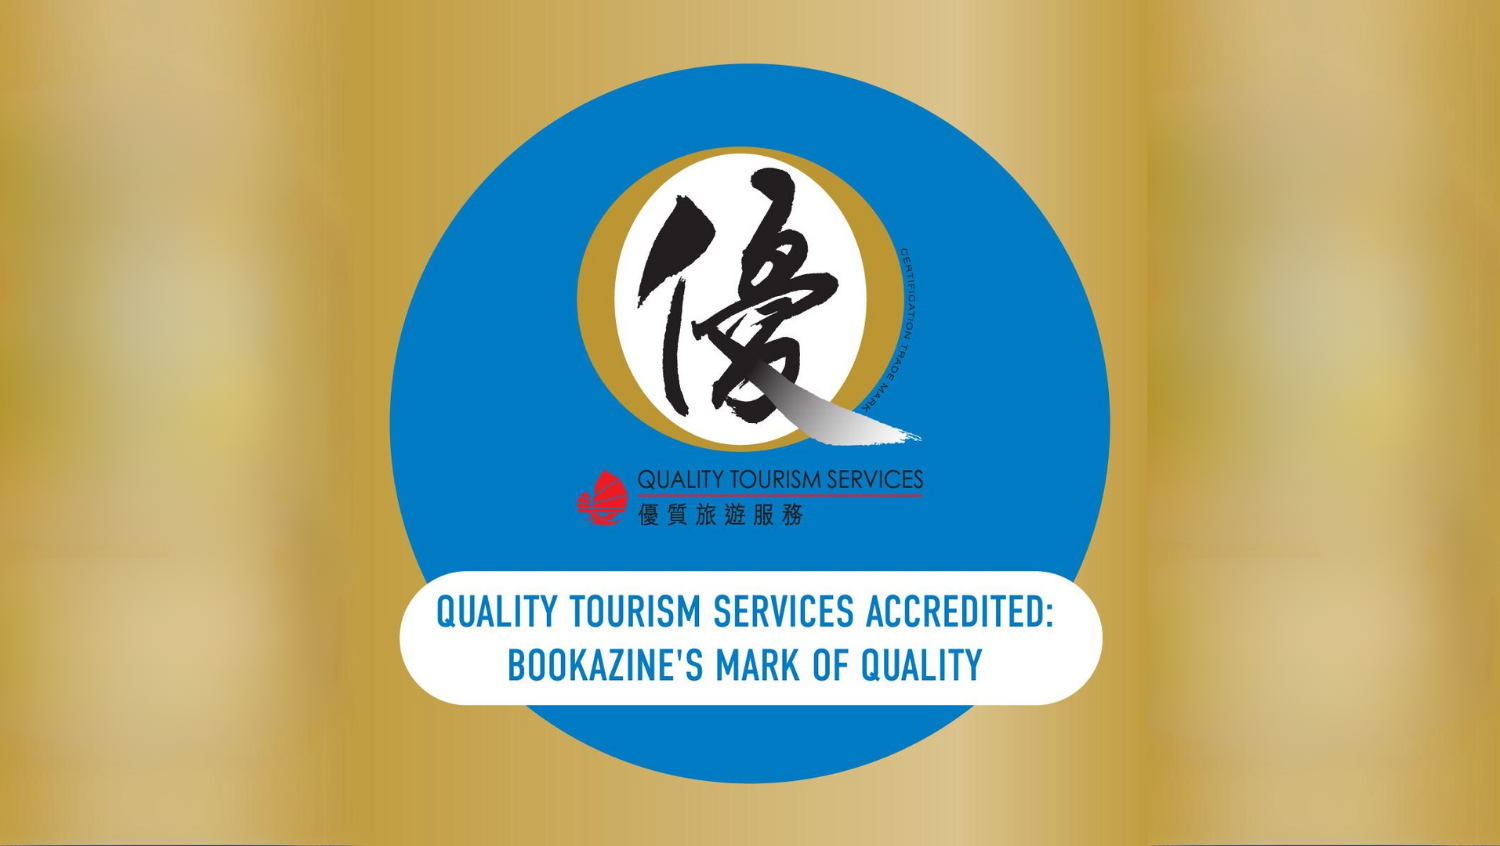 Exciting News: Our Quality Tourism Services Accreditation!